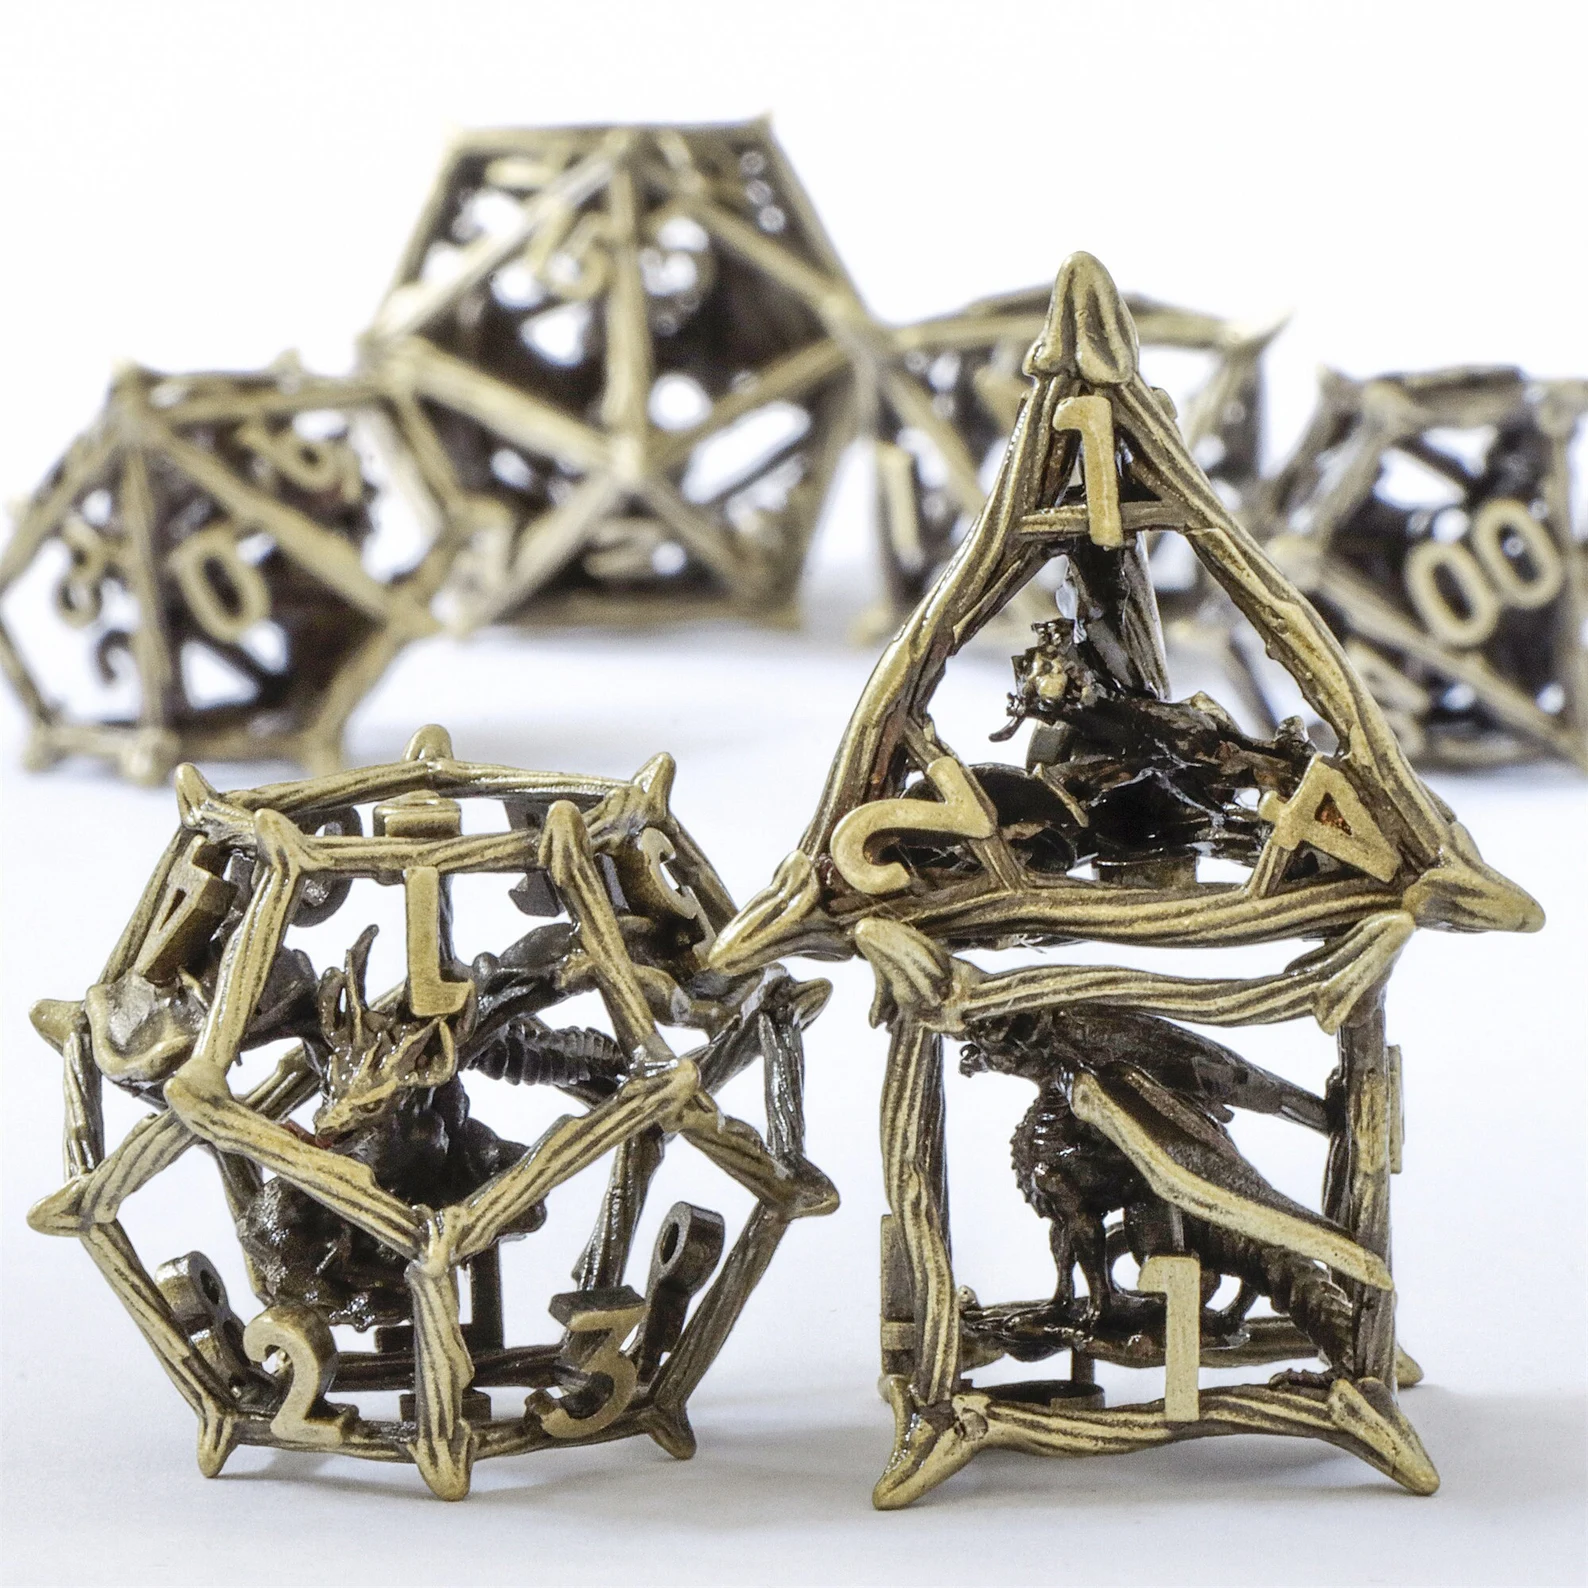 A photo of seven gold Hollow Metal Dice with dragons inside. 